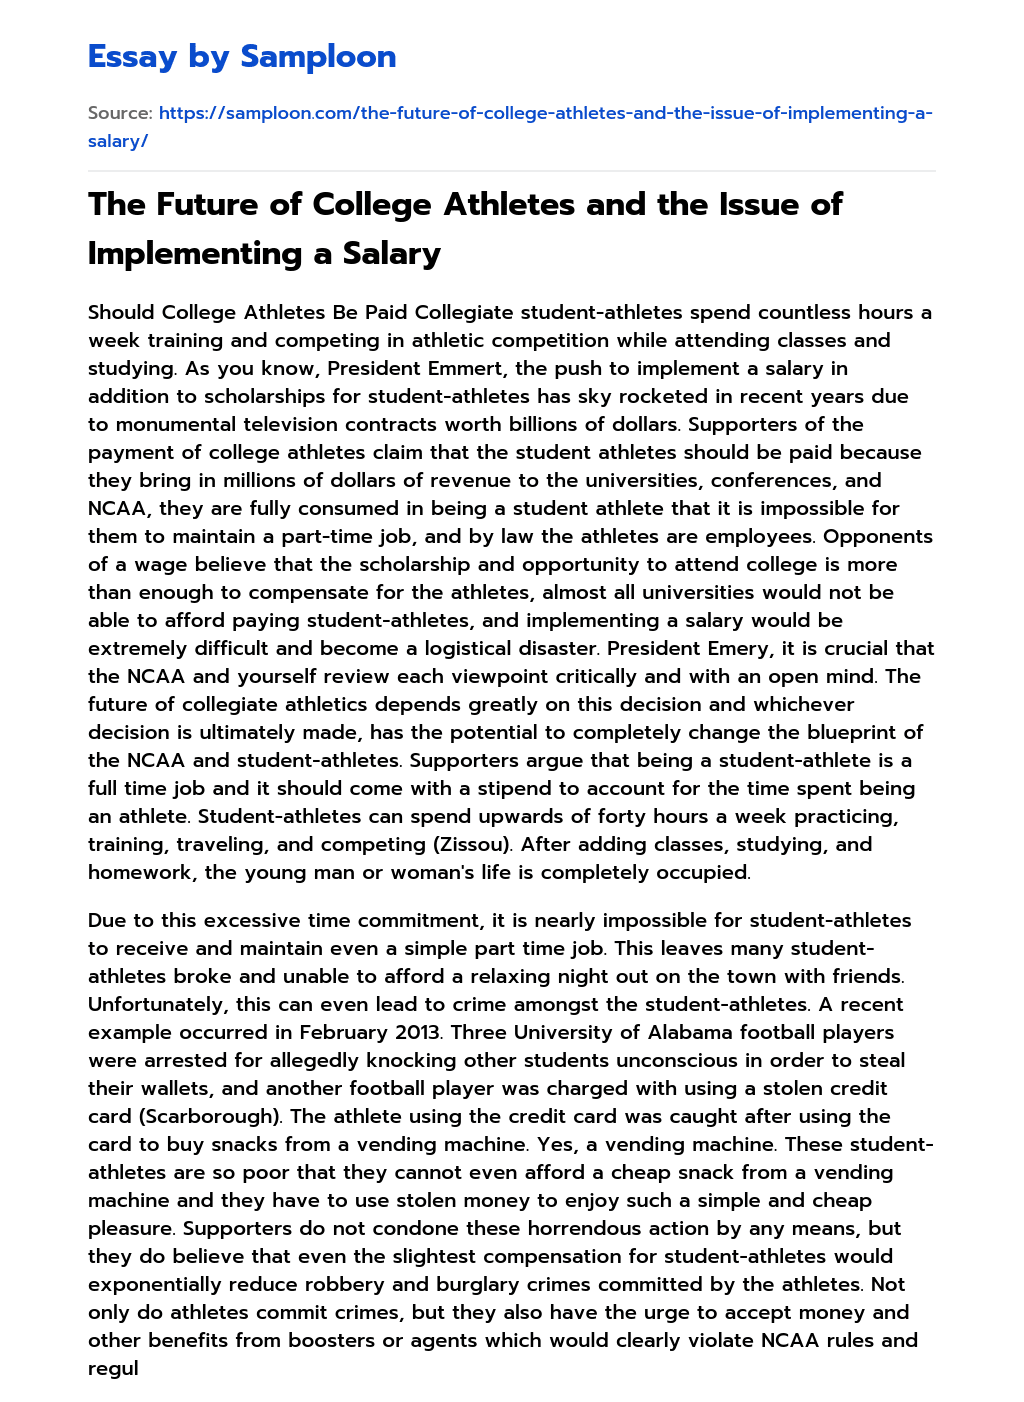 The Future of College Athletes and the Issue of Implementing a Salary essay